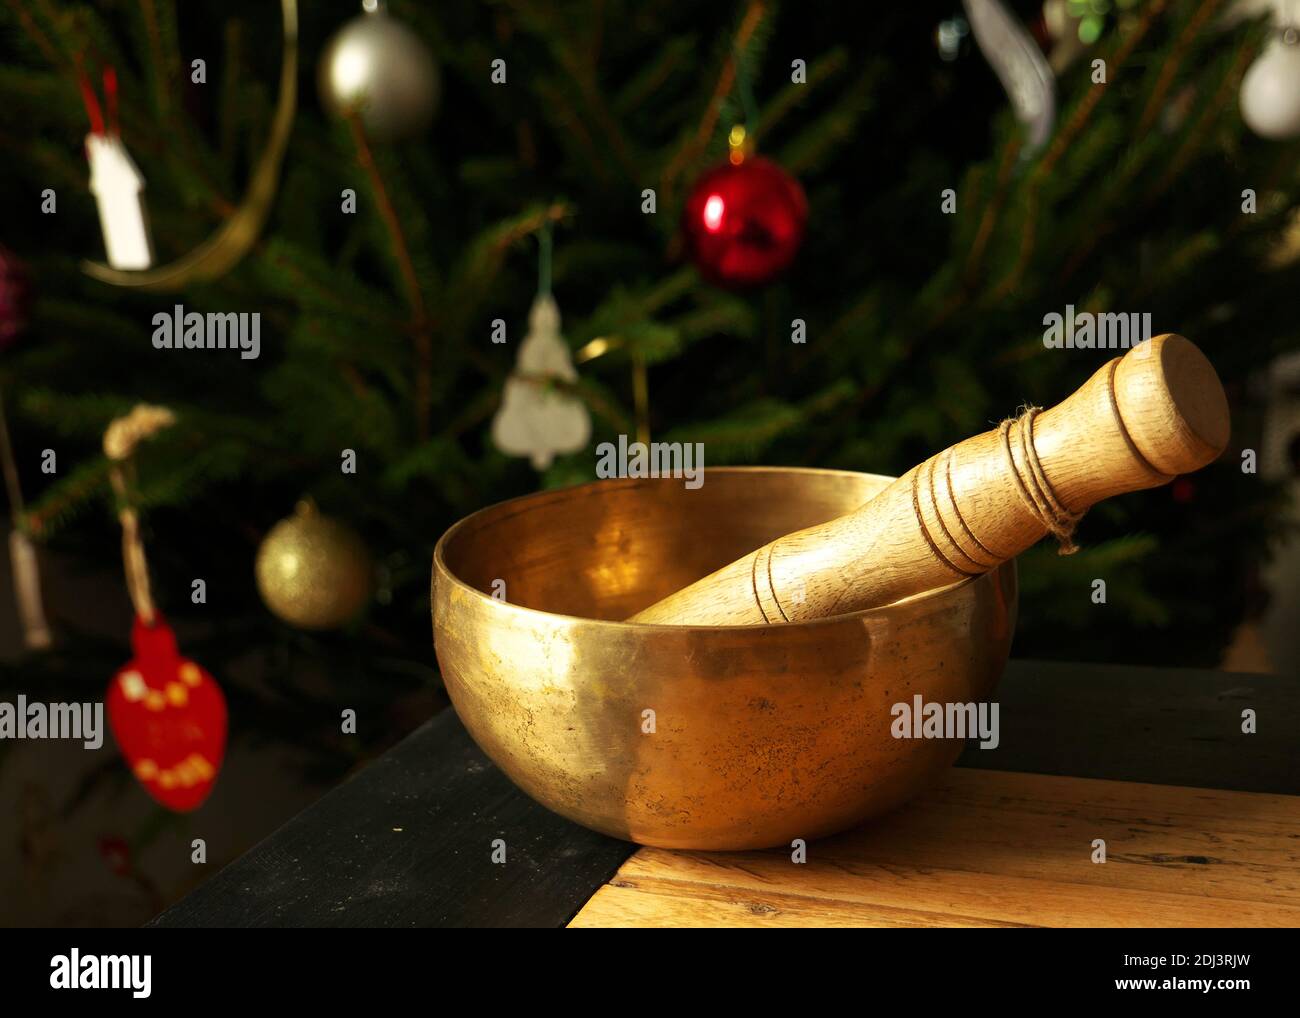 Singing bowl with Christmas decorations in the background Stock Photo